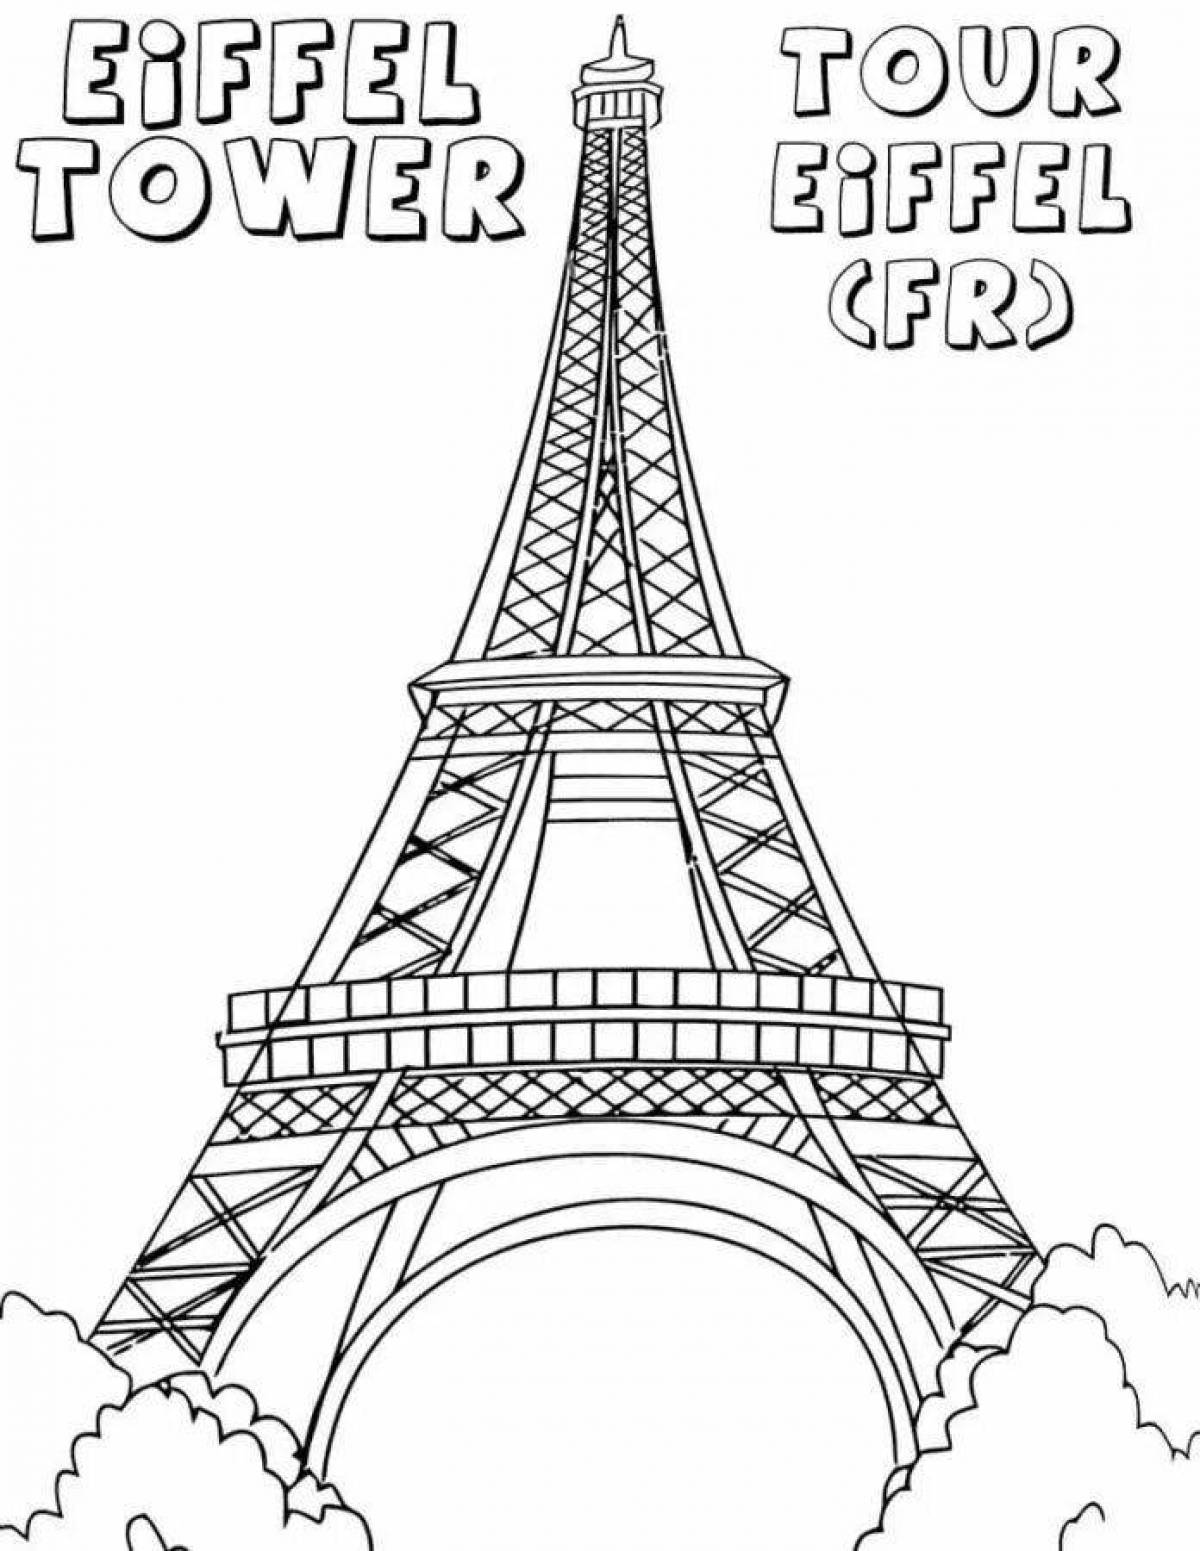 Awesome tower coloring book